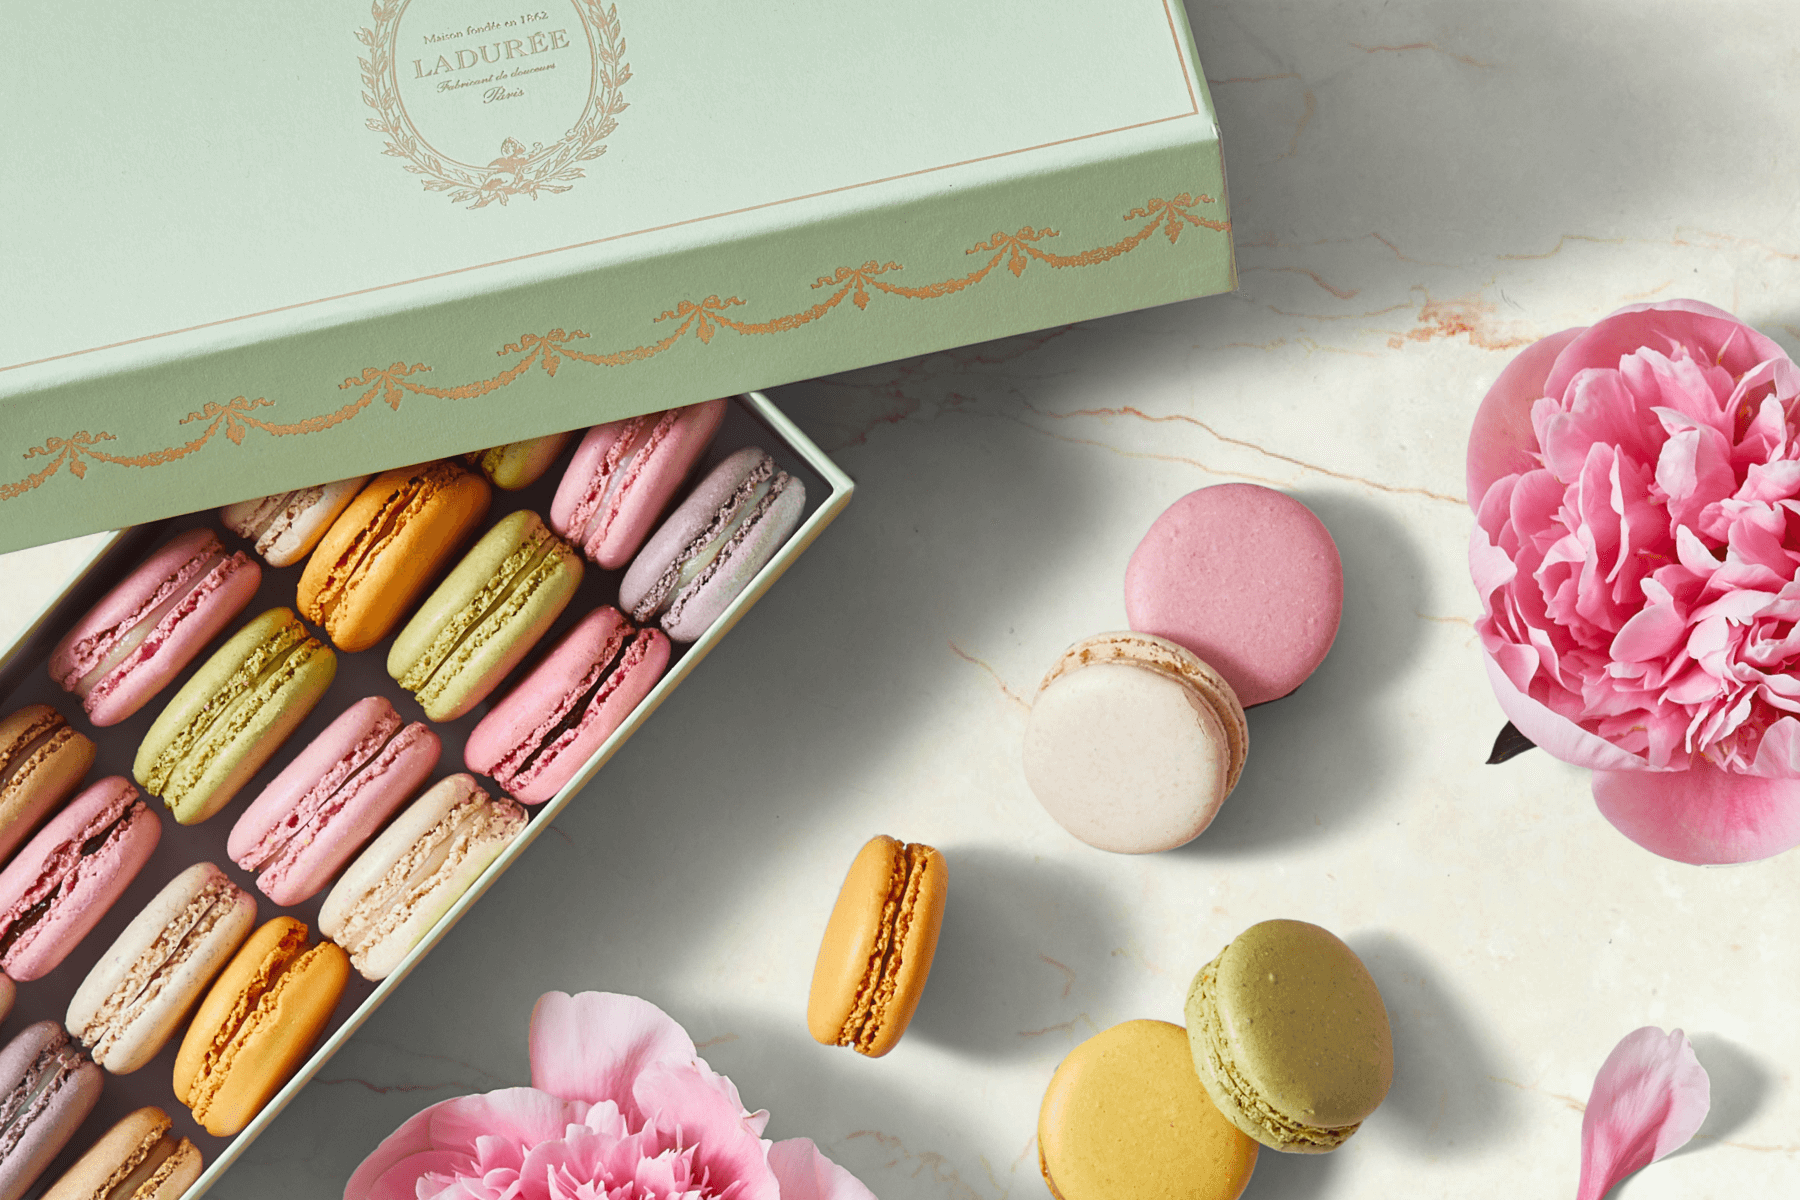 A box of Ladurée macarons with a few macarons and flowers on a table.